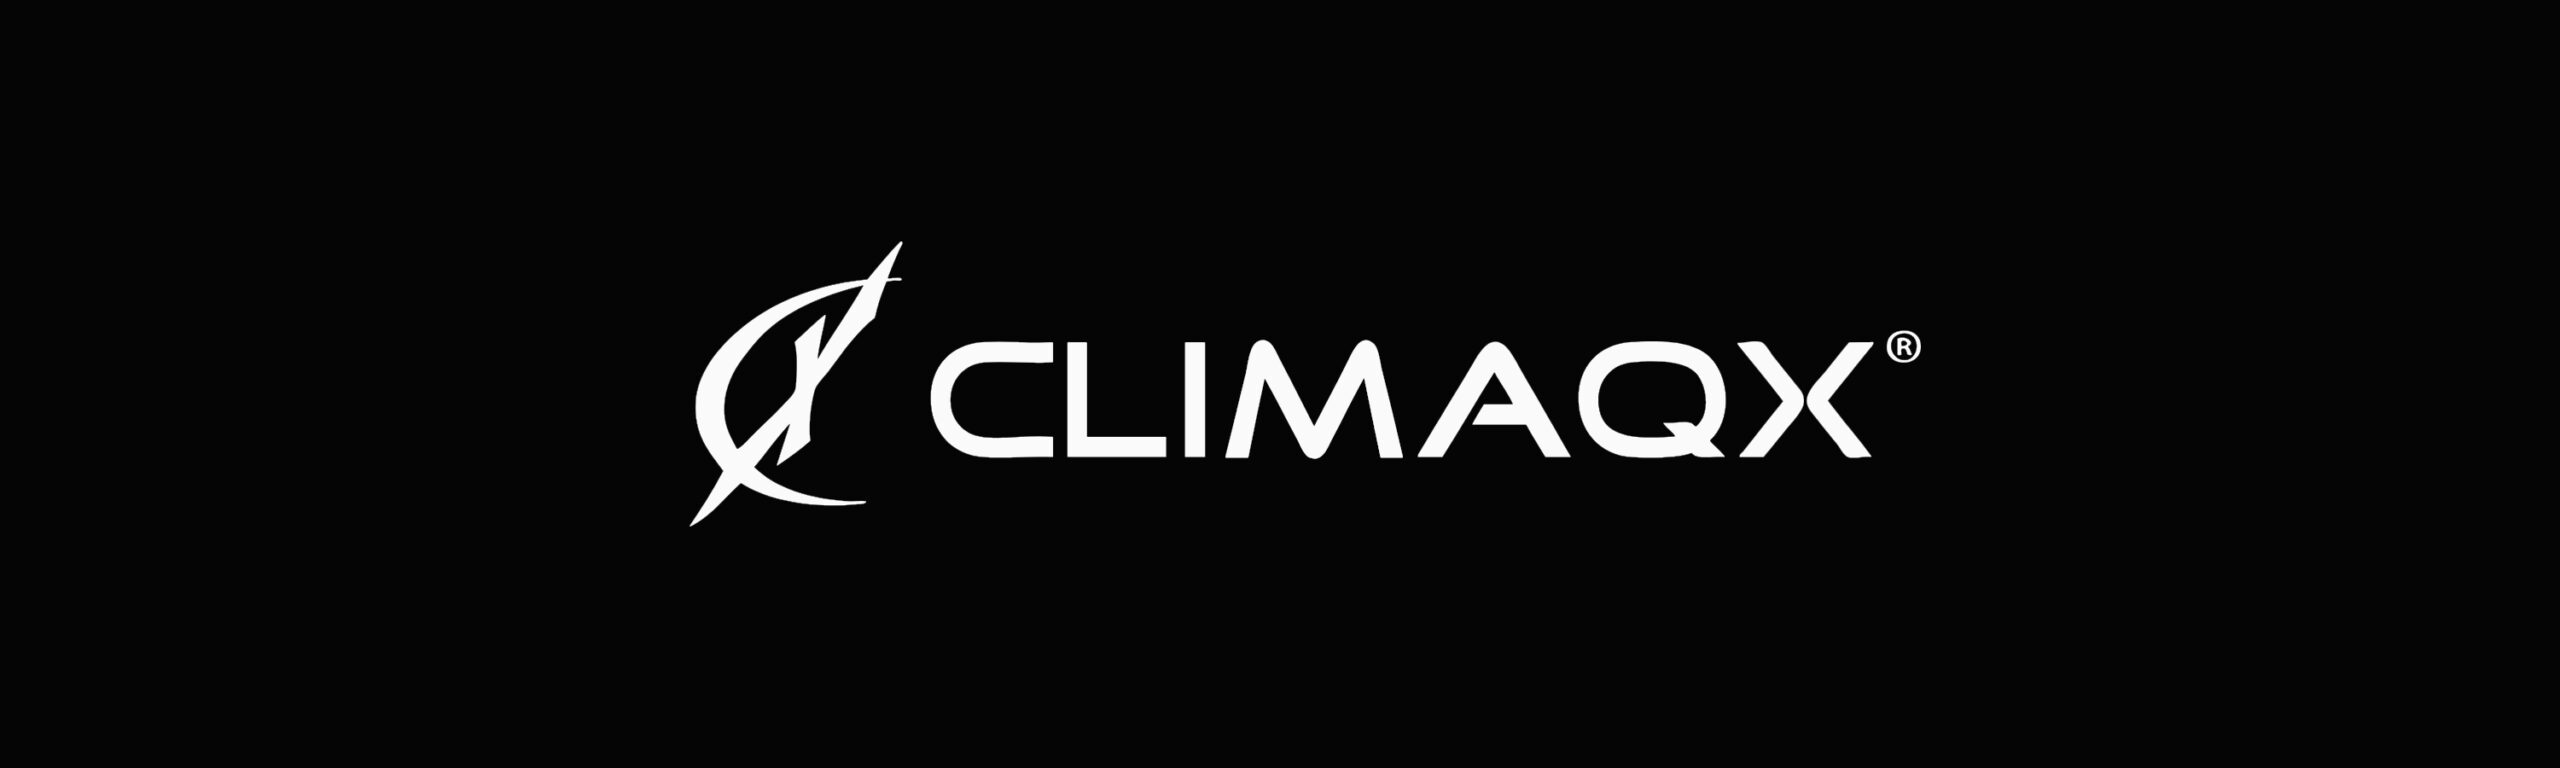 CLIMAQS